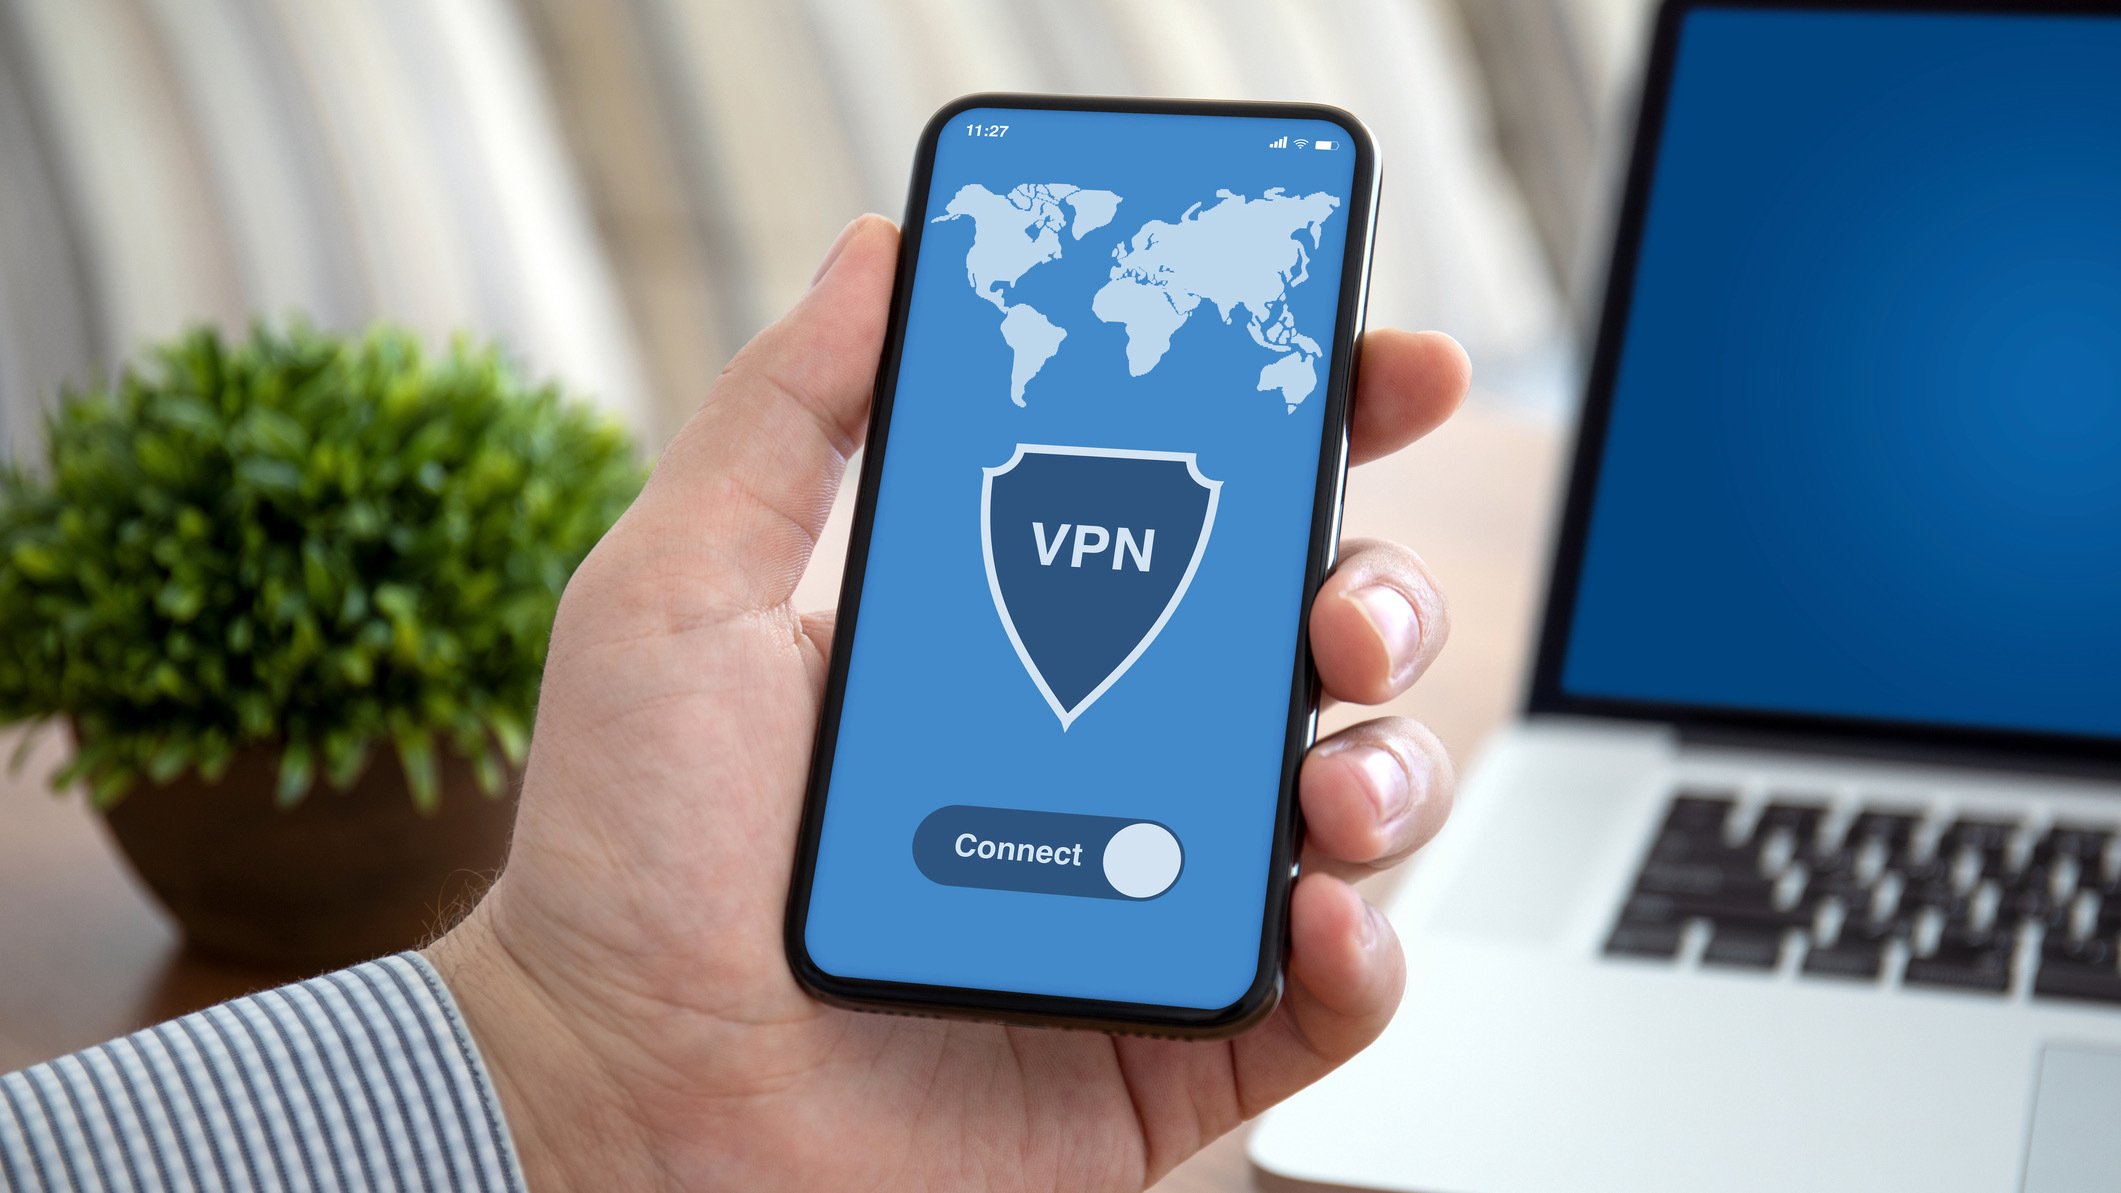 man holding smartphone in front of laptop, phone screen reads 'VPN'